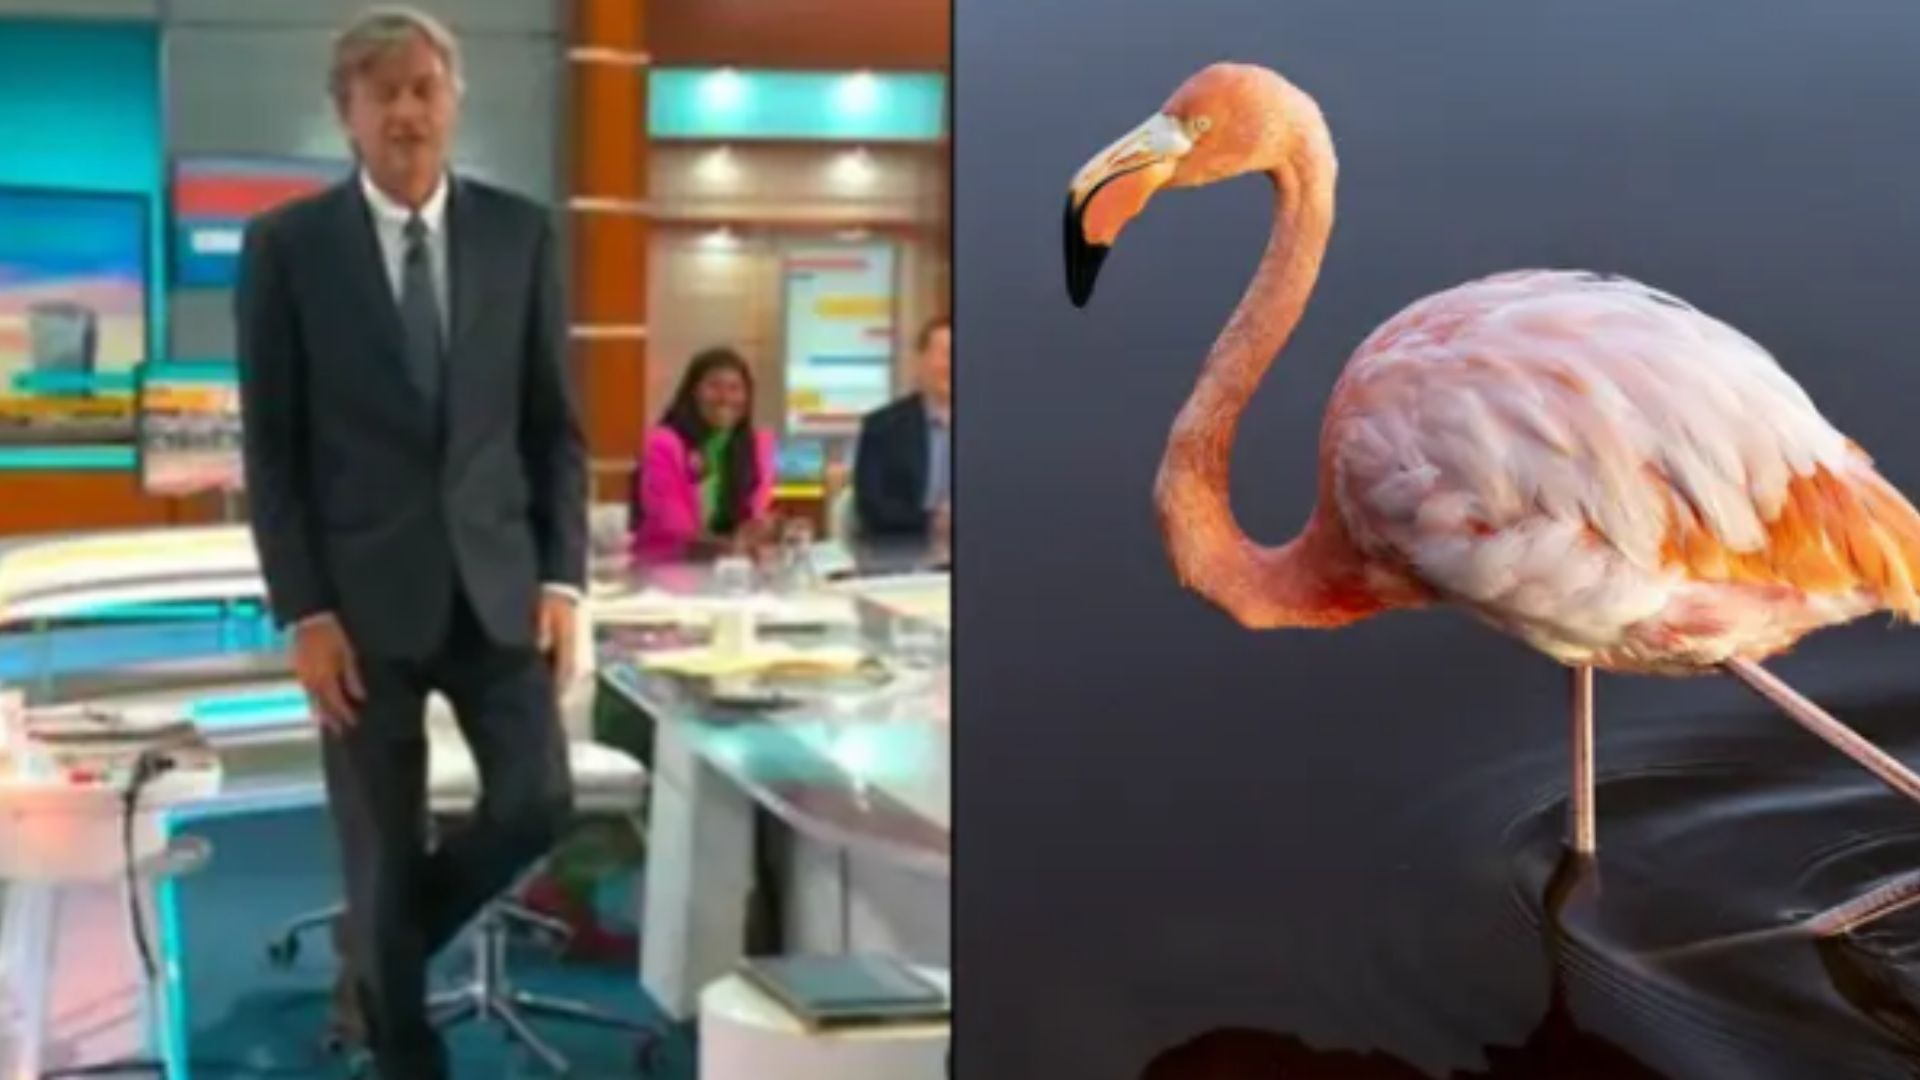 Flamingo balance test proposes youll pass on in the next 7 years